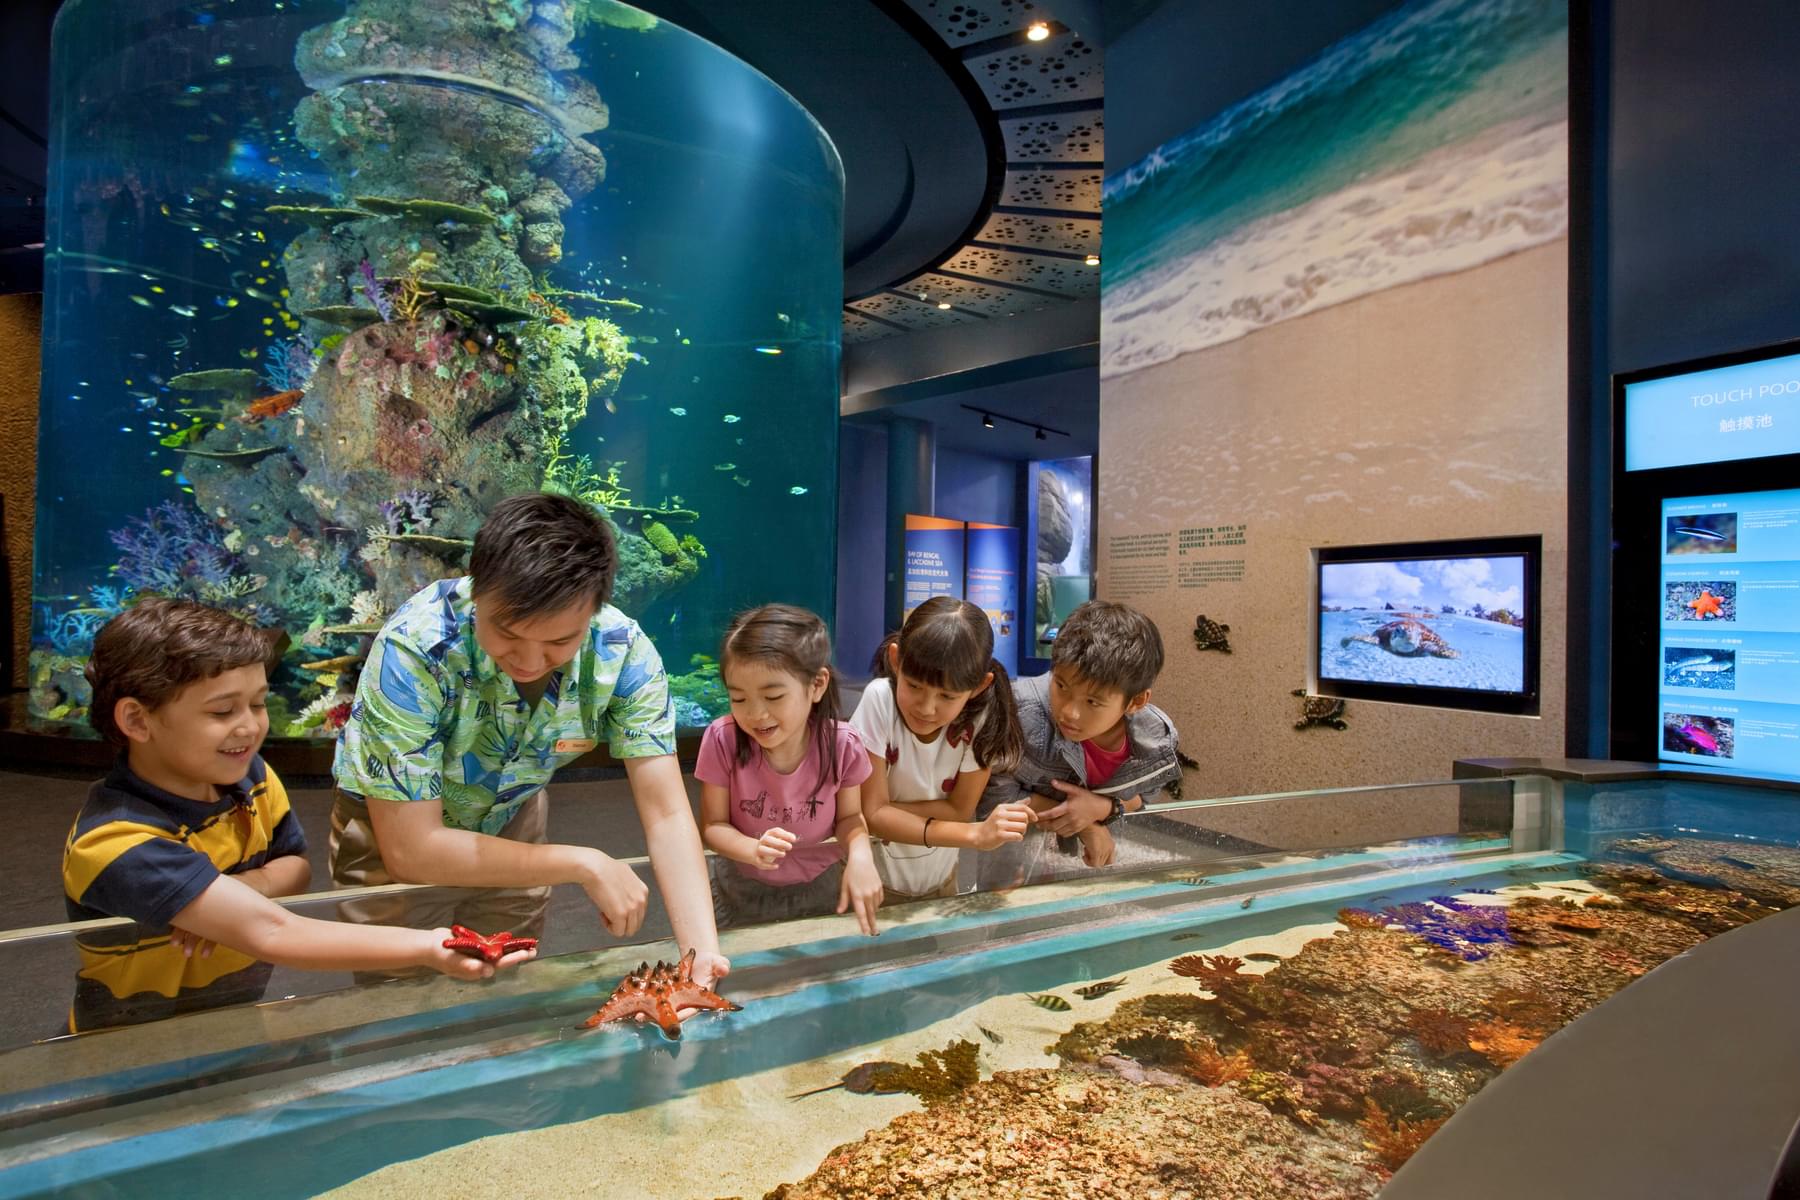 See your kids have a fun time learning about the marine environment